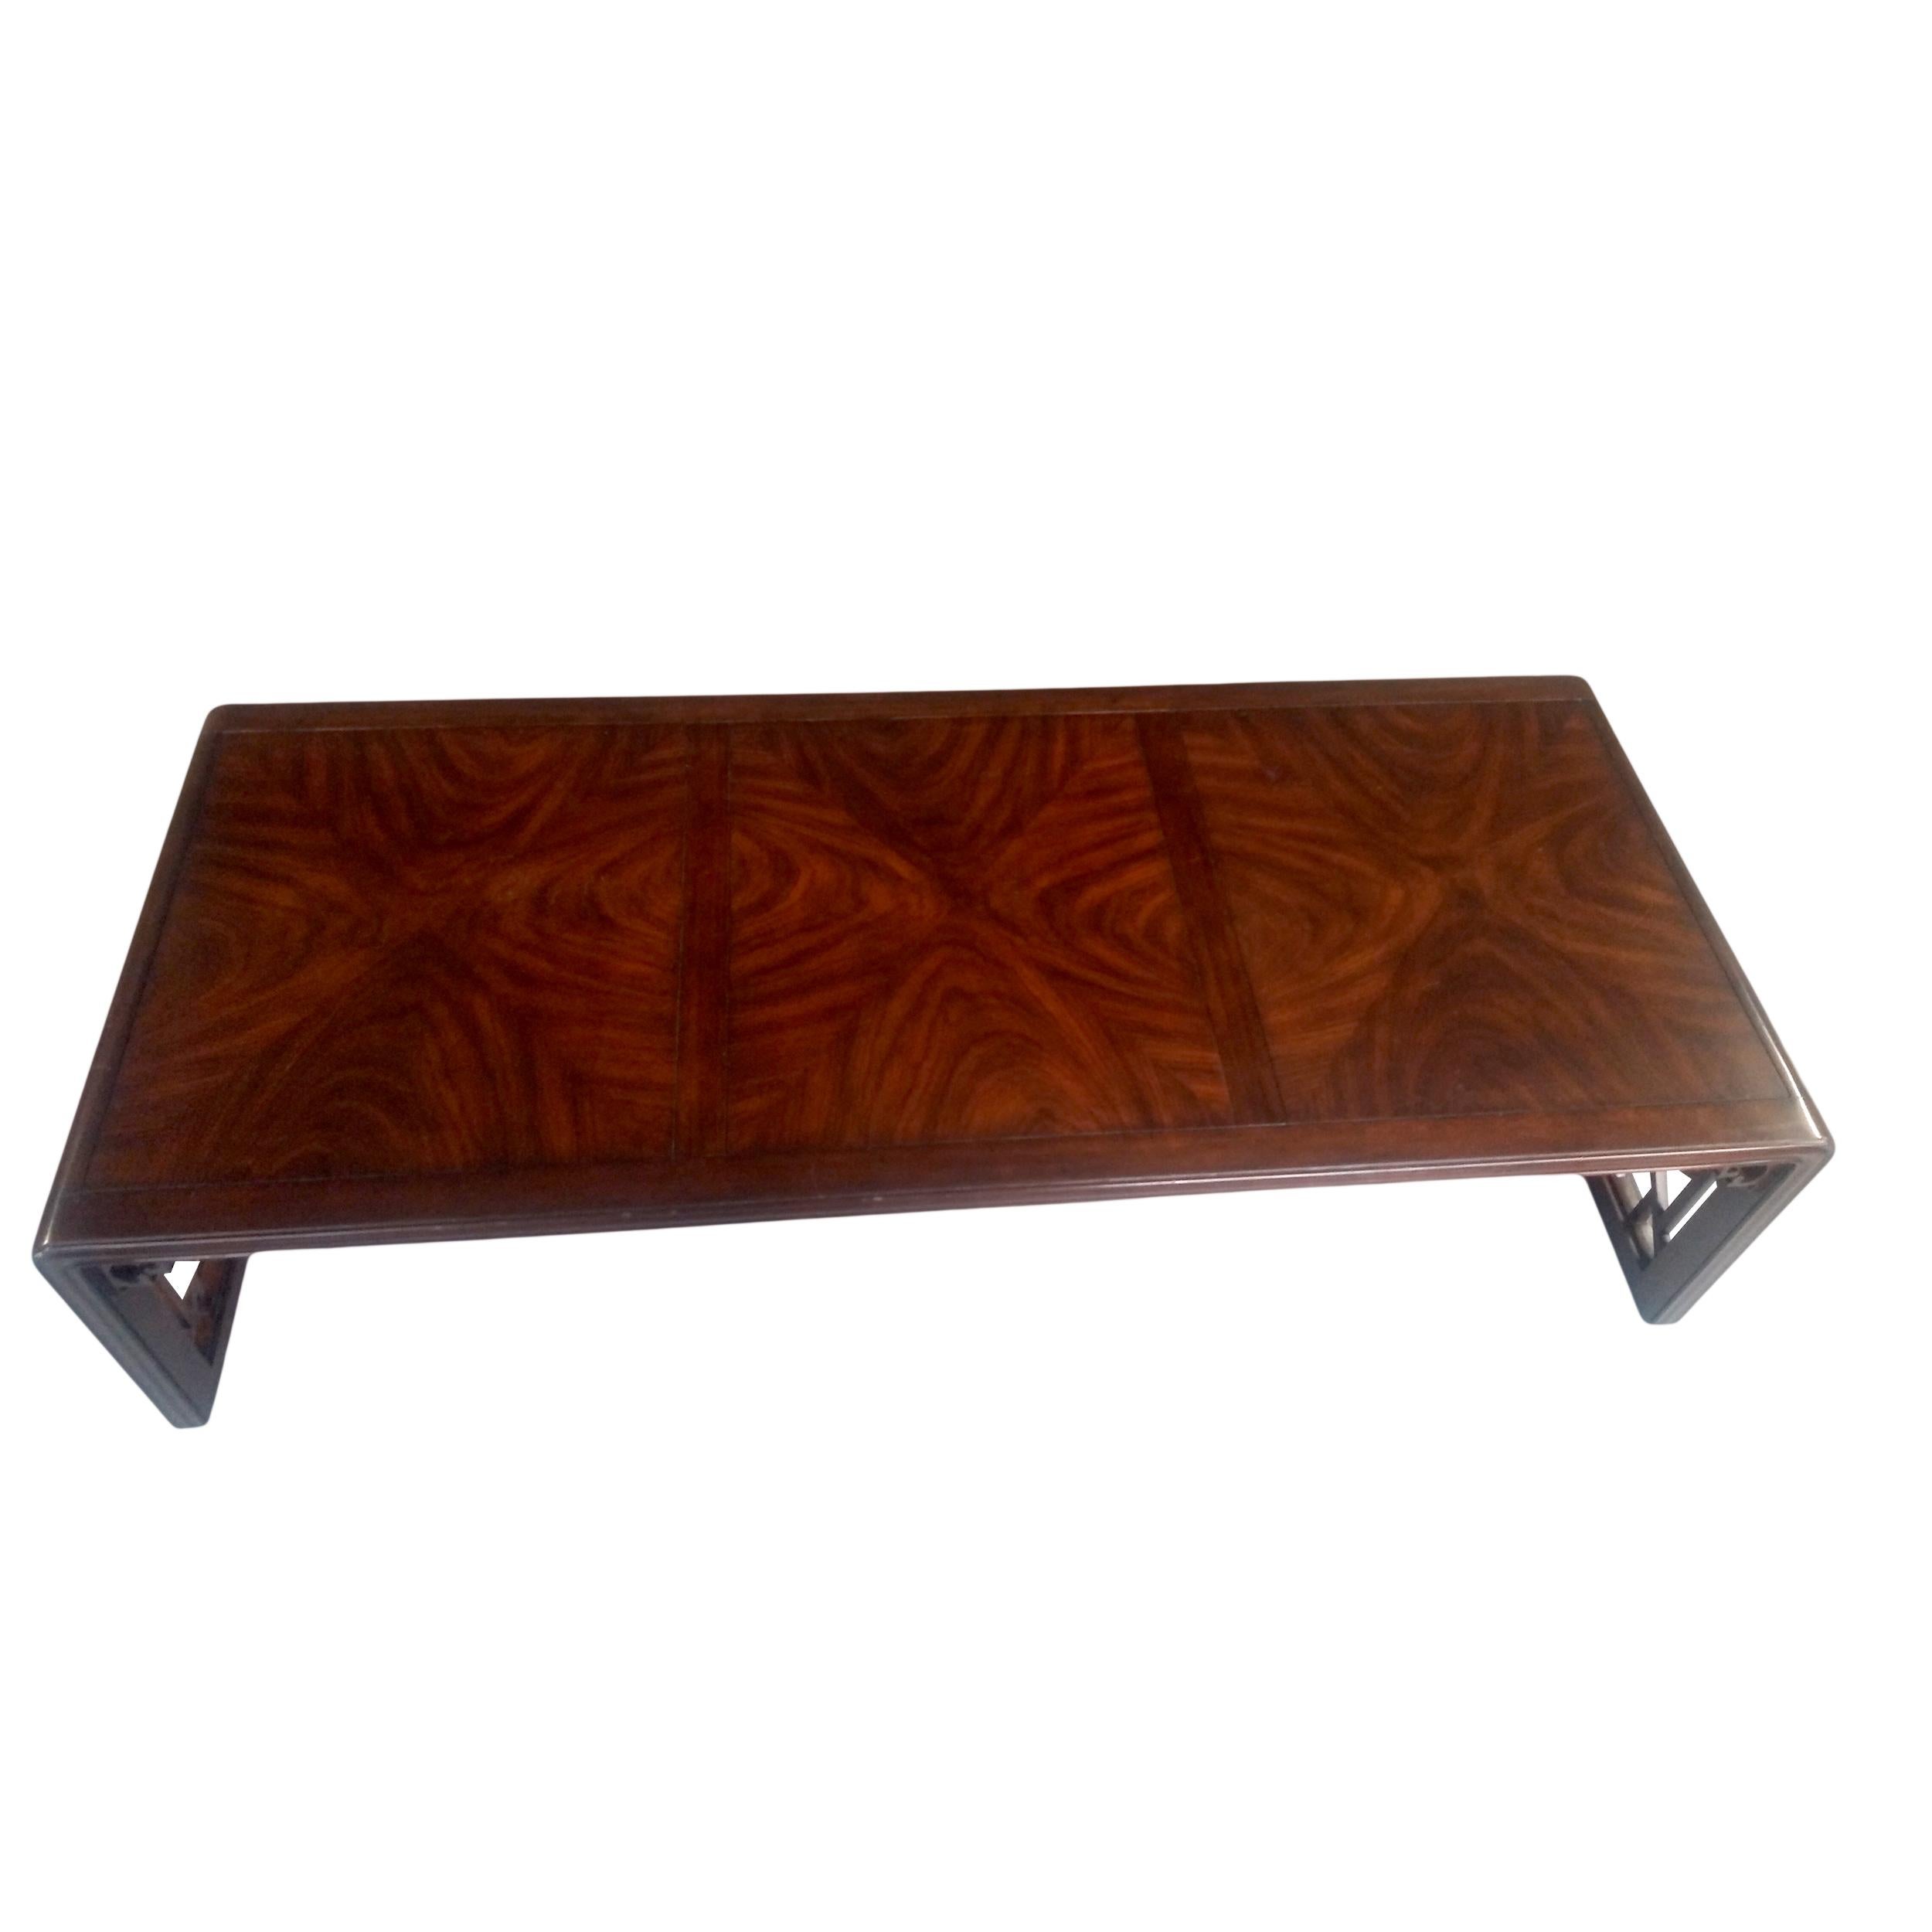 Chinoiserie Chin Hua Waterfall Coffee Table with Fretwork Details